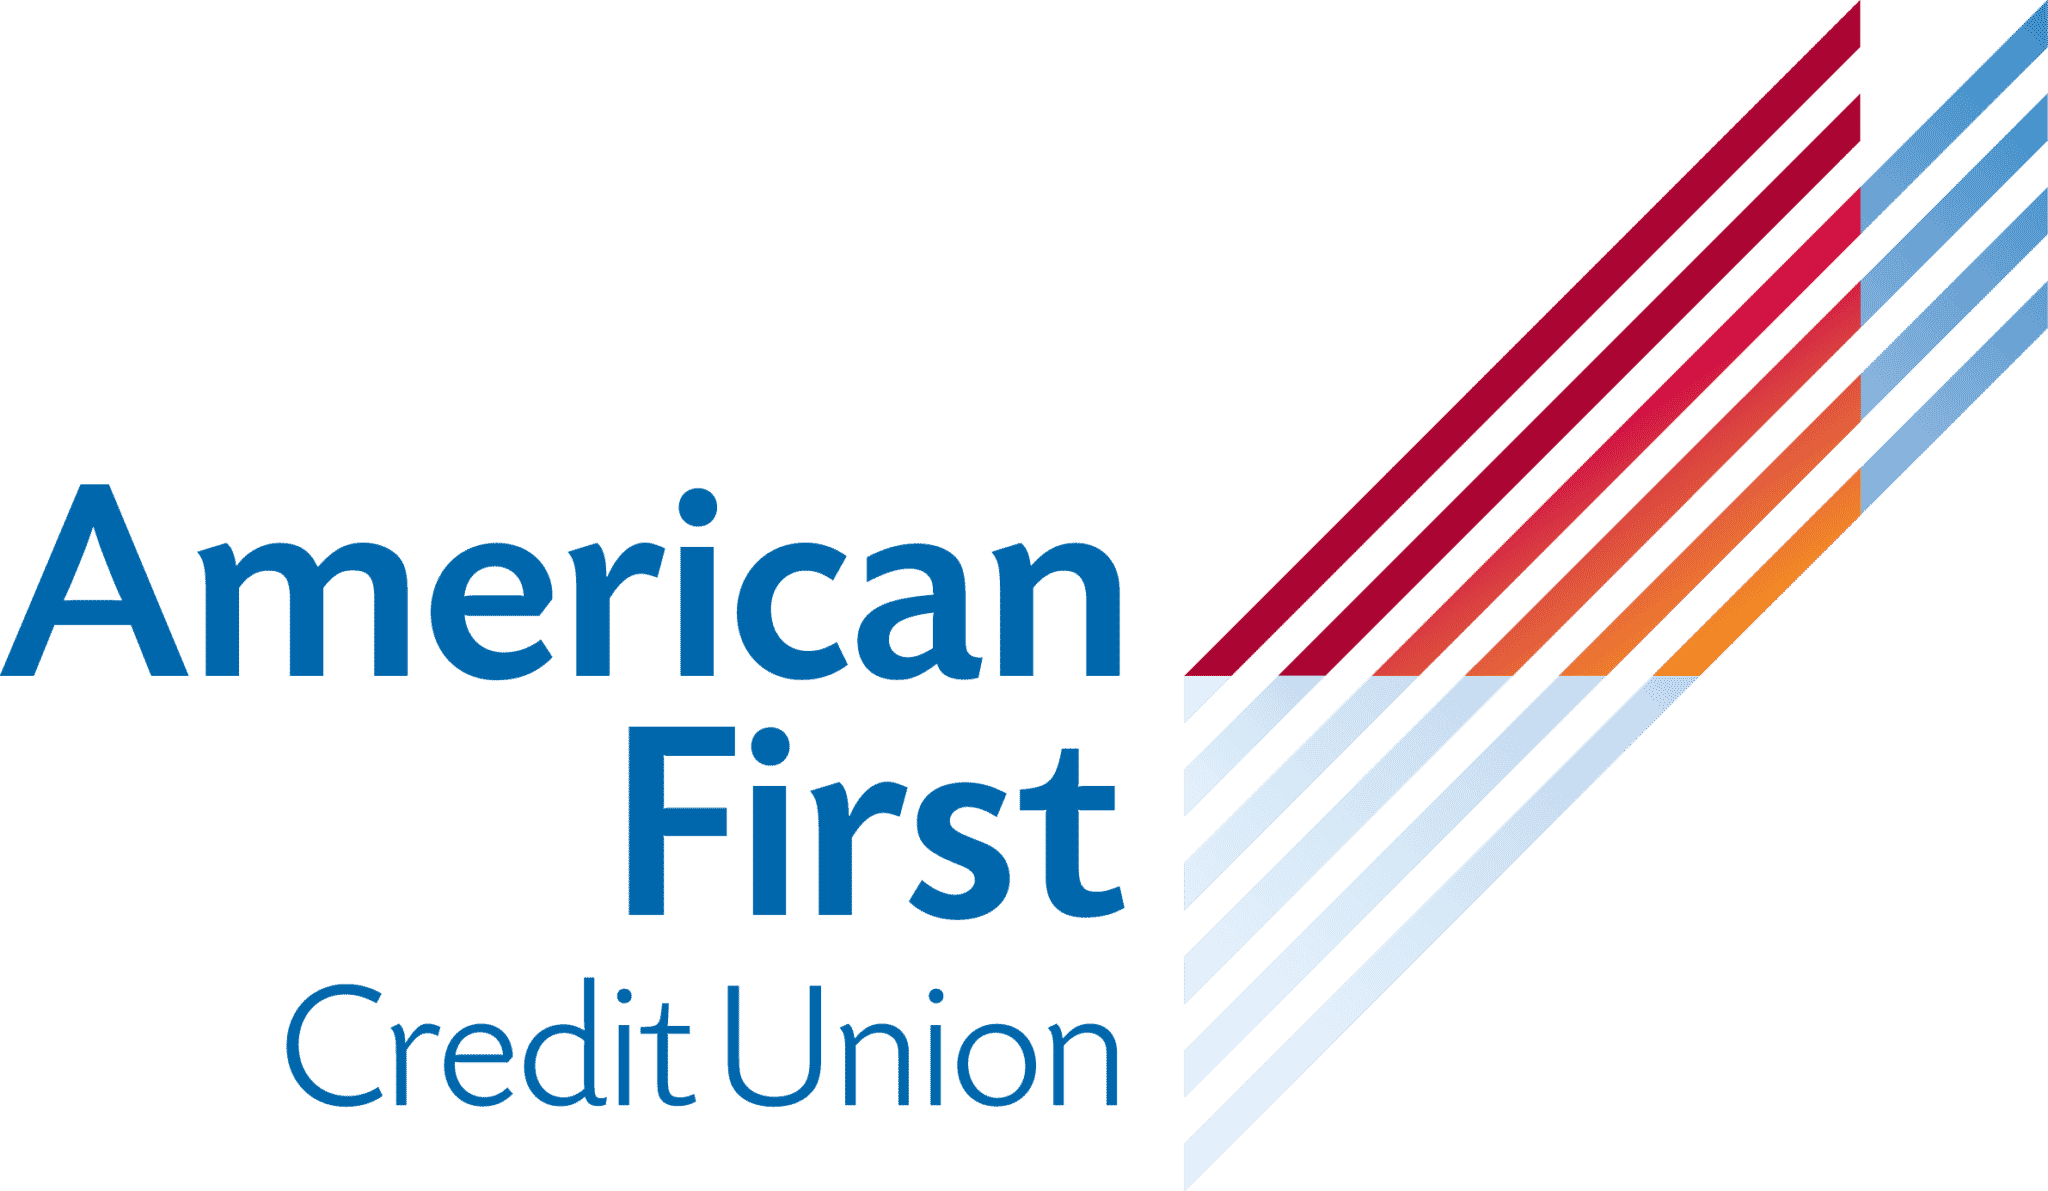 Best Credit Unions: American First Credit Union